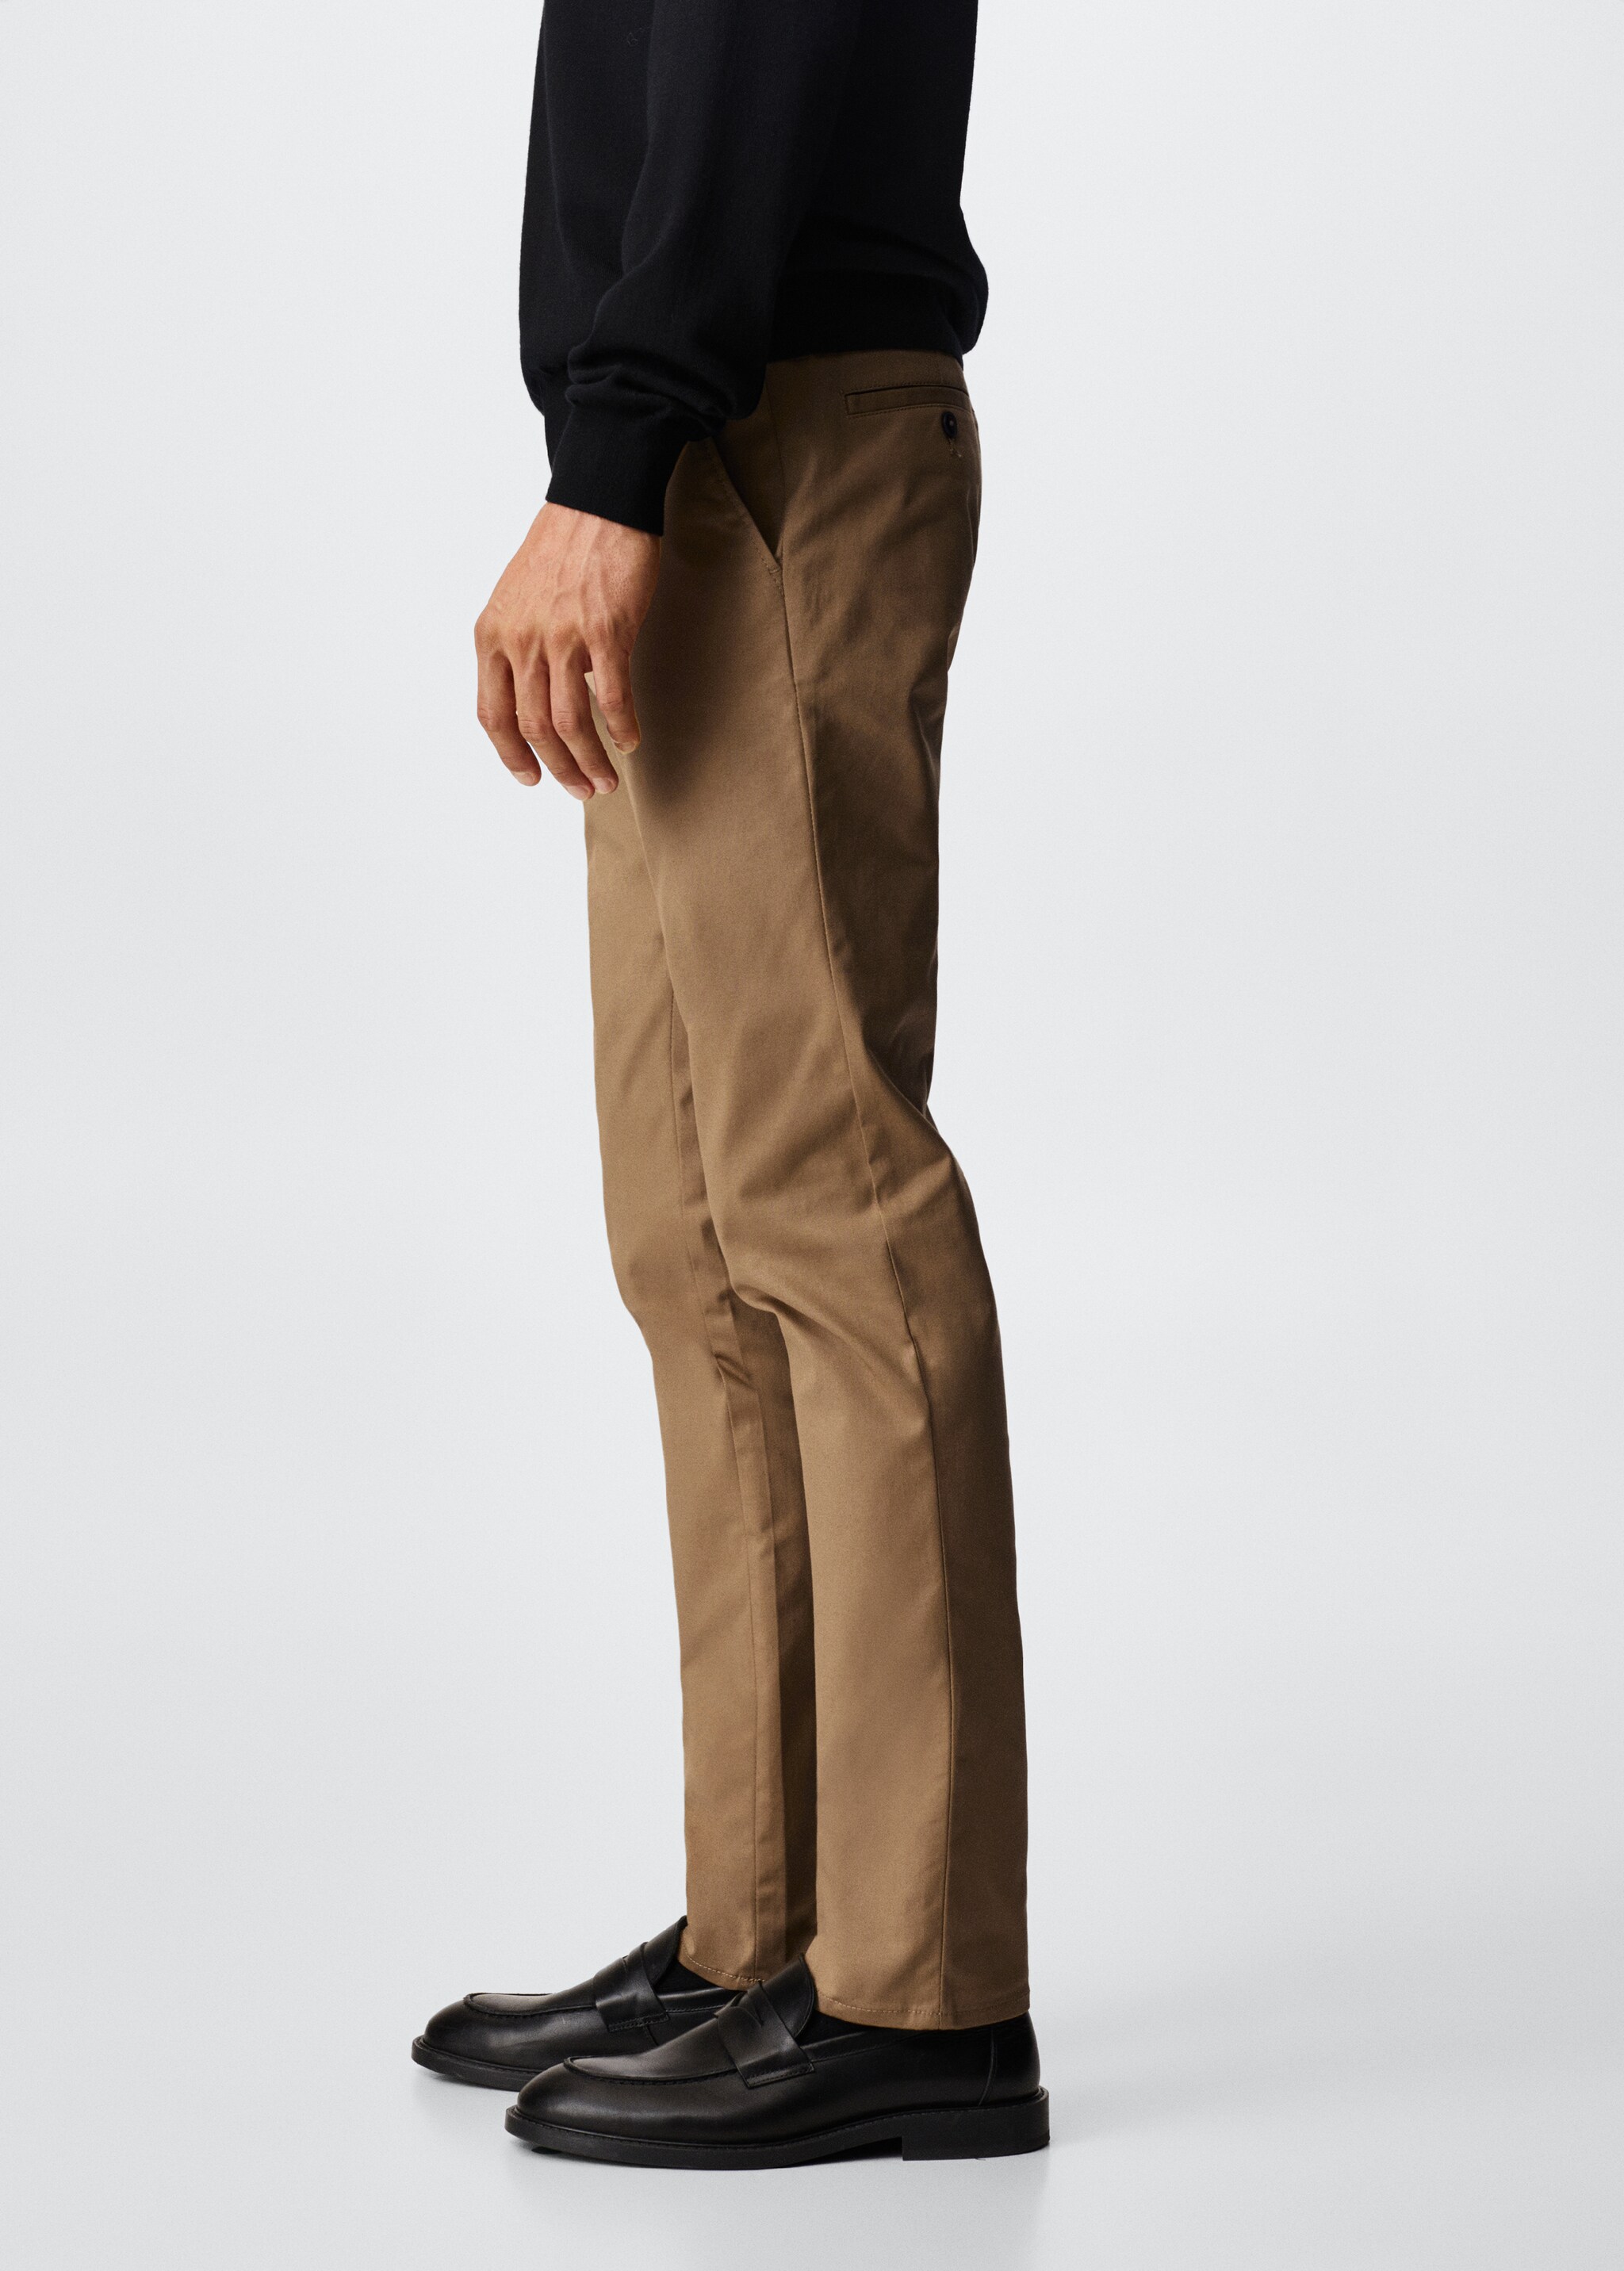 Skinny chino trousers - Details of the article 6